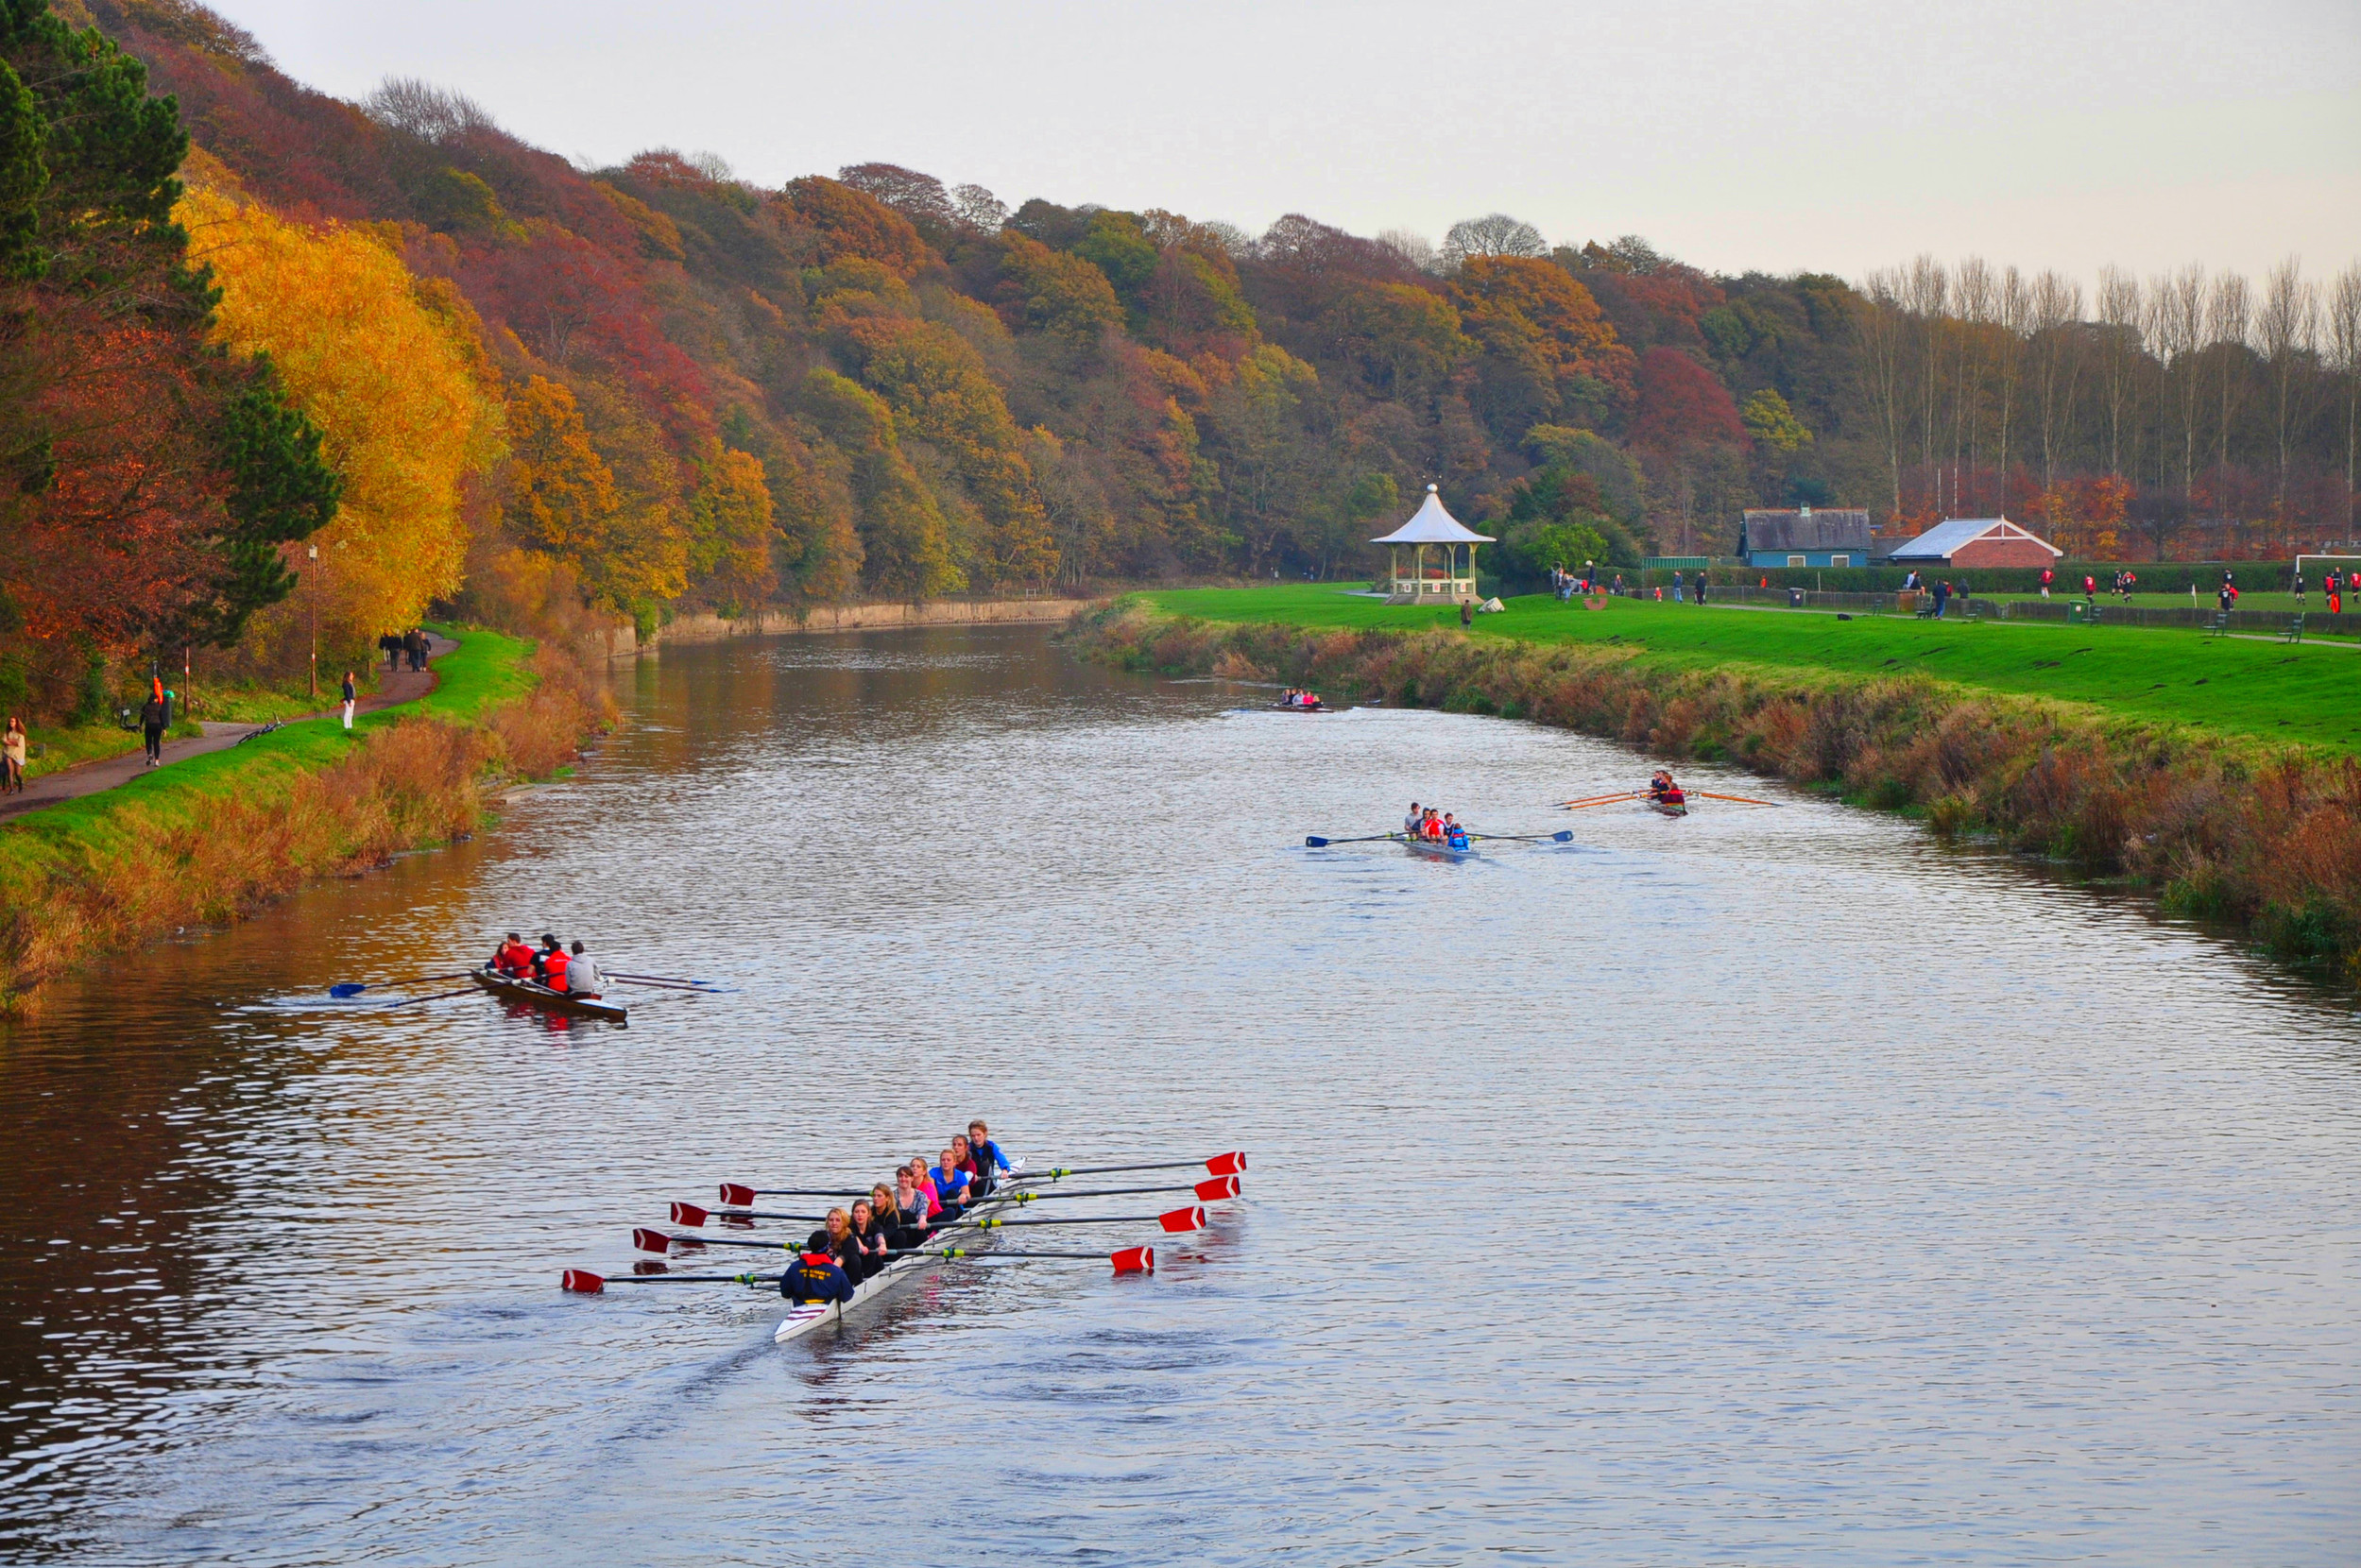 Rowers on the River Wear near the Racecourse